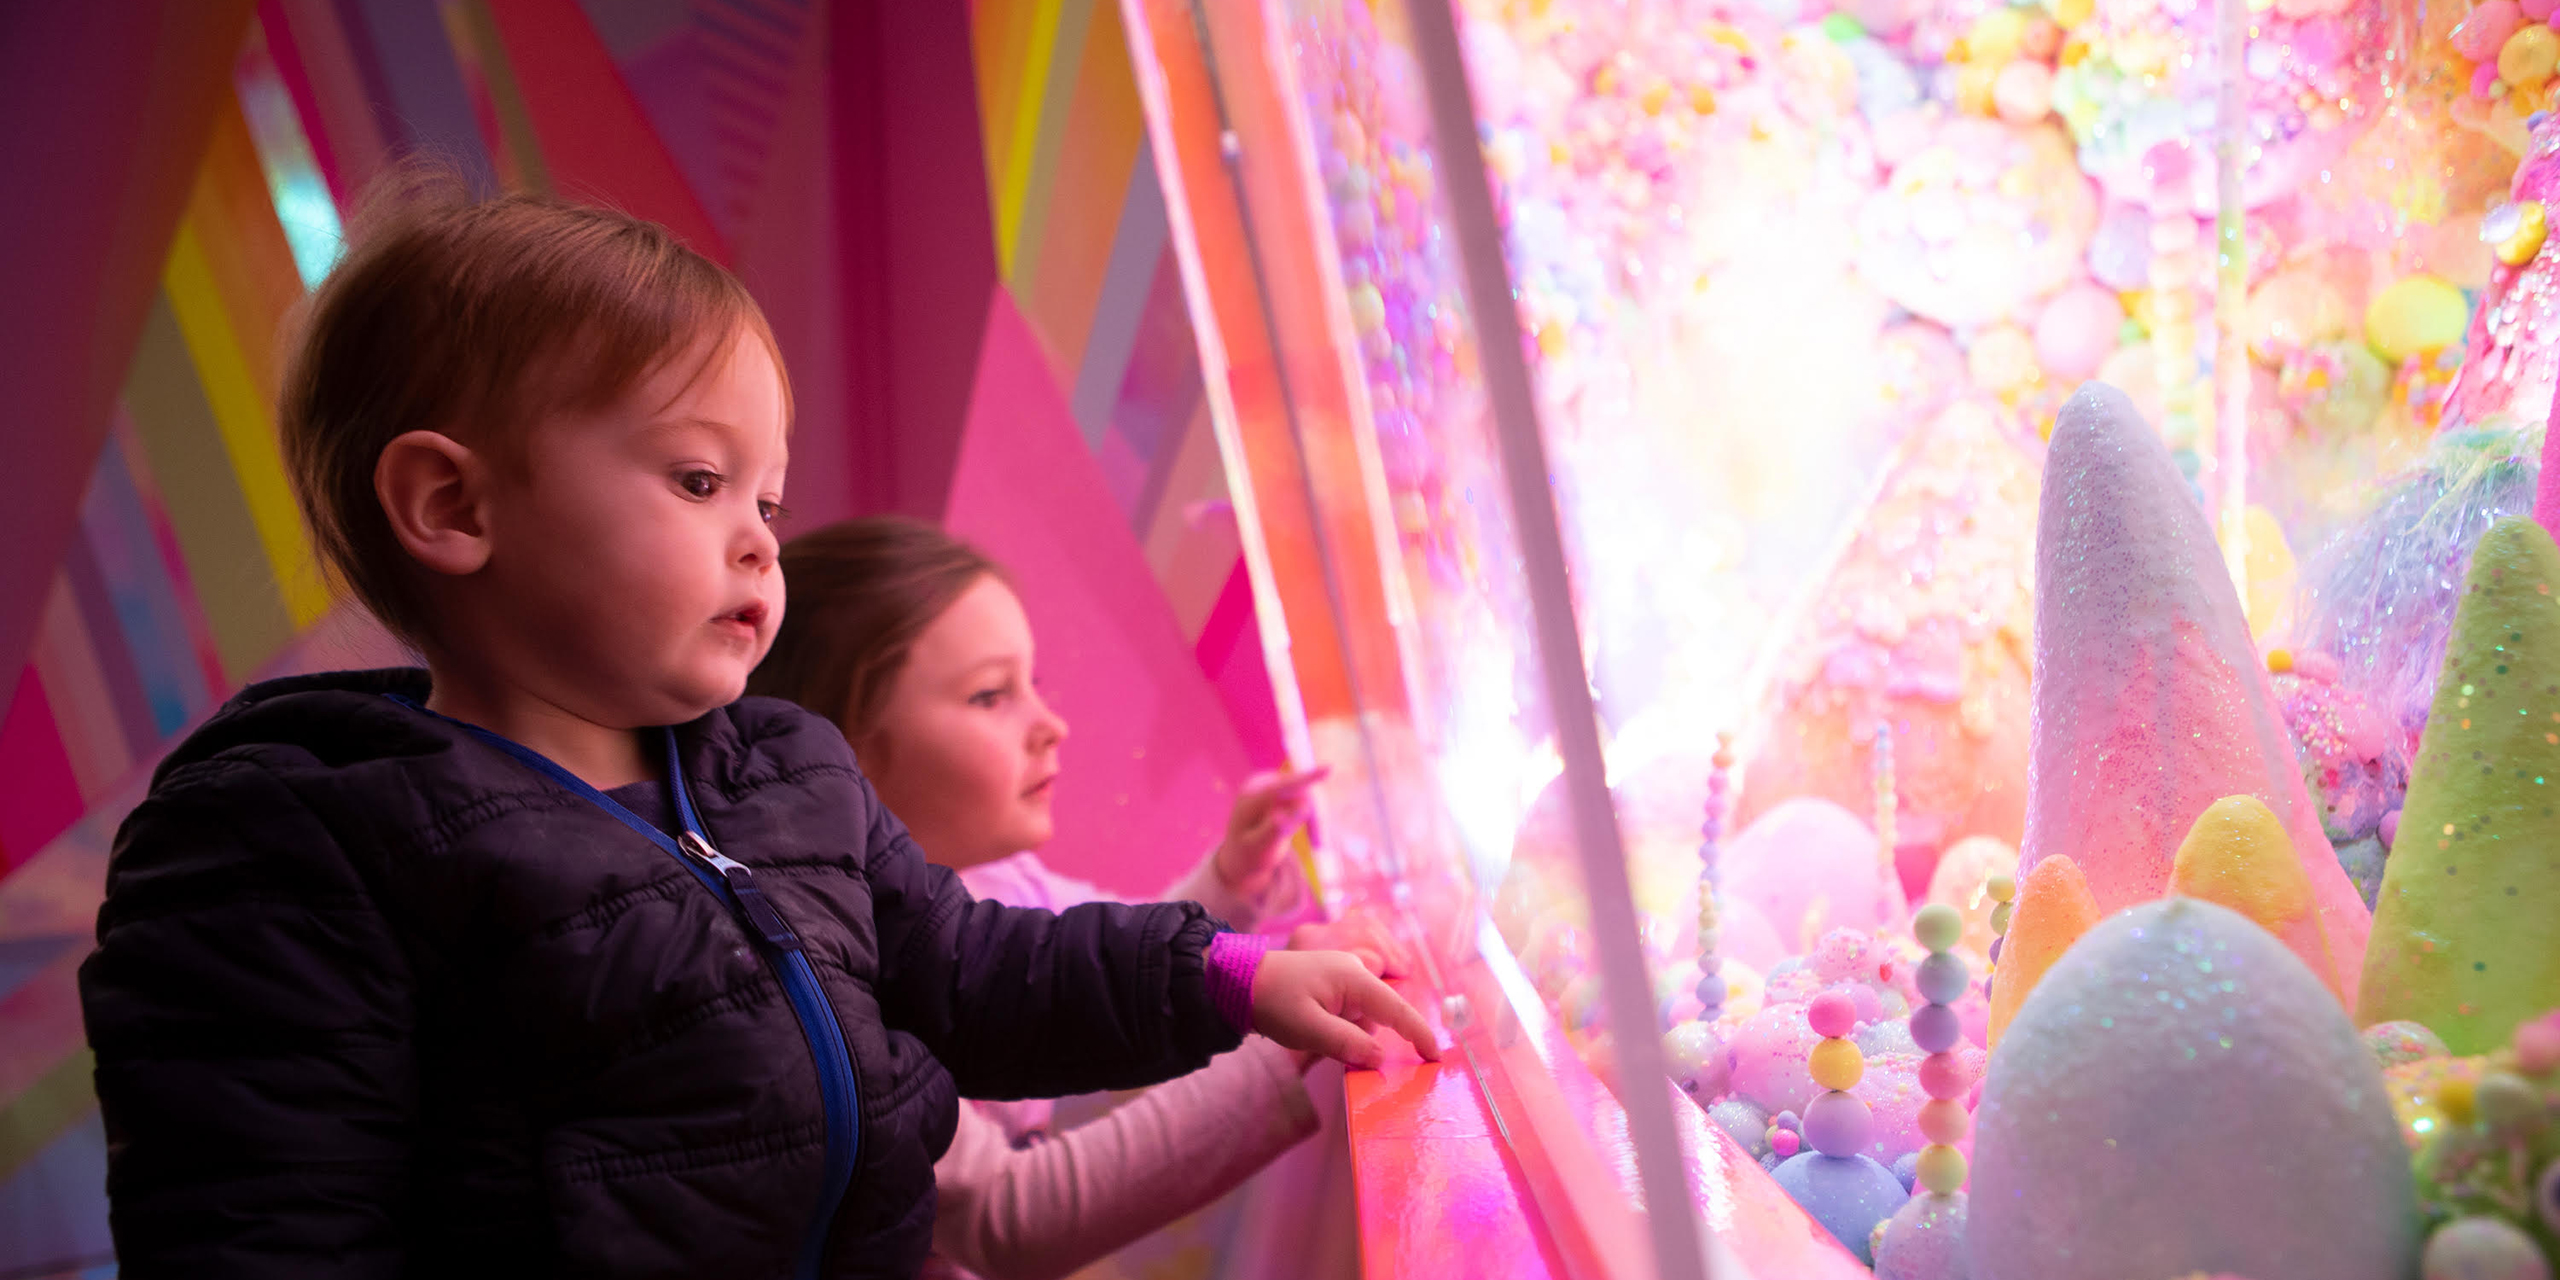 Kids at Meow Wolf in Santa Fe, New Mexico; Courtesy of Meow Wolf